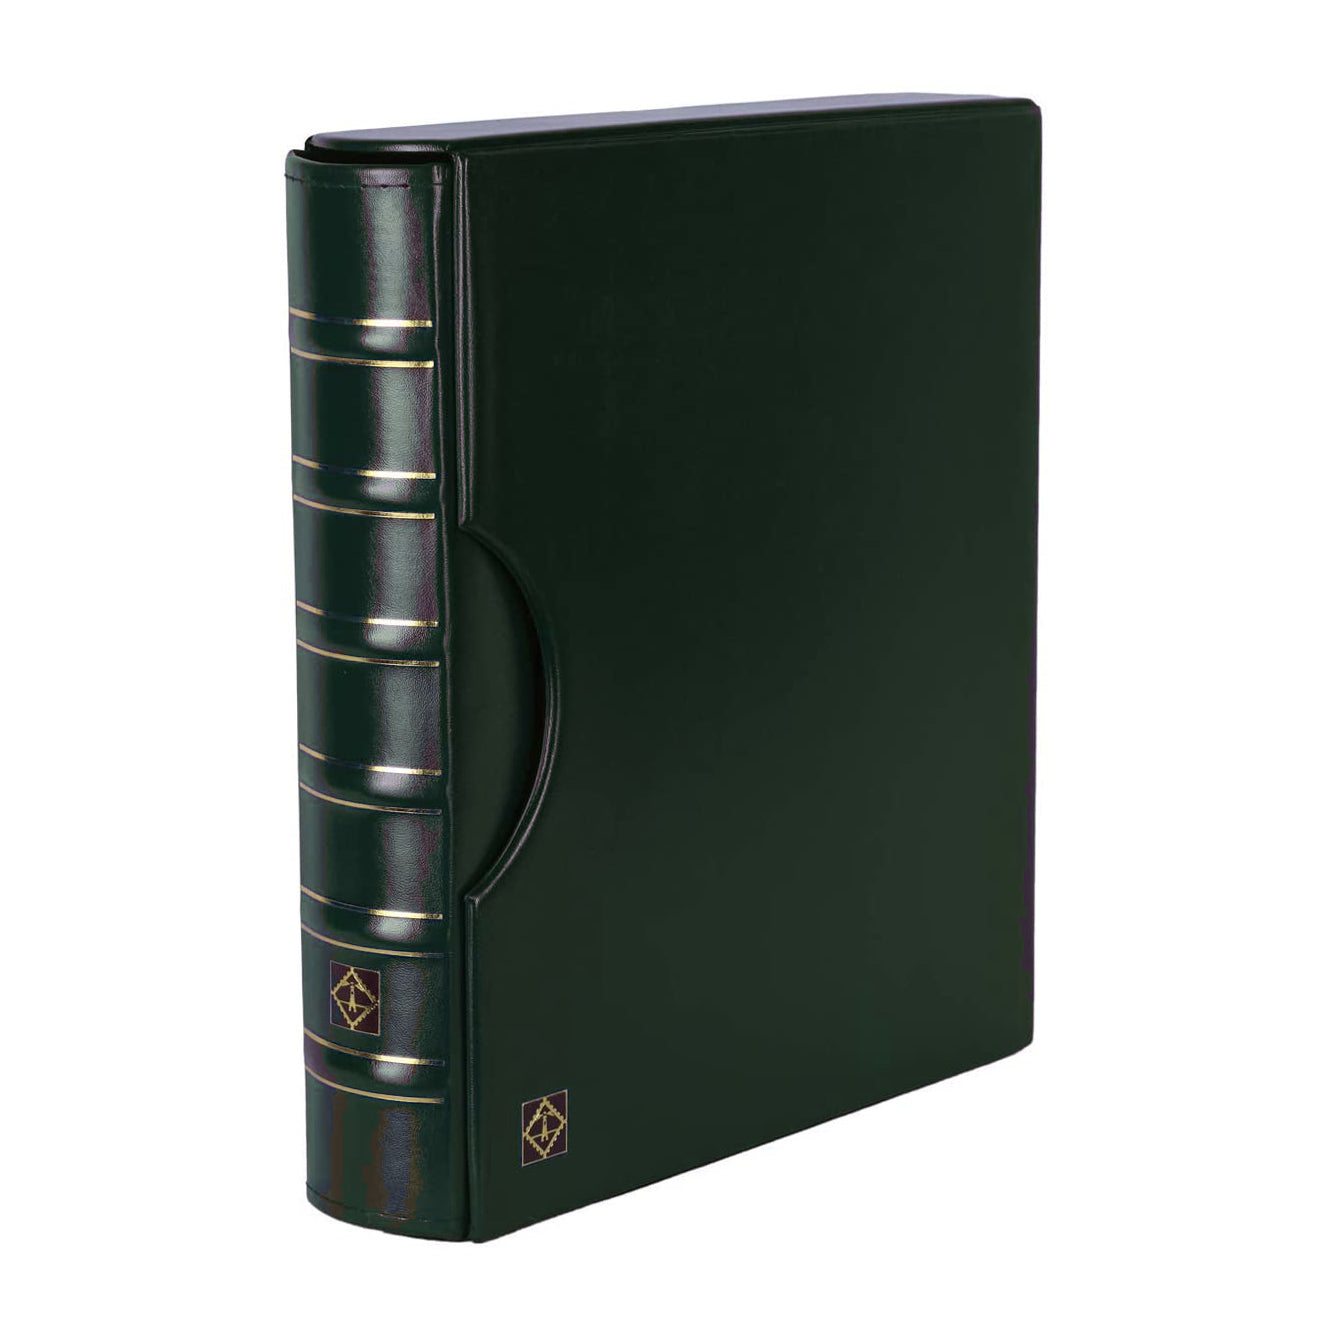 Classic Grande 3-Ring Binder with Slipcase for Storage of Coins, Stamps, Currency